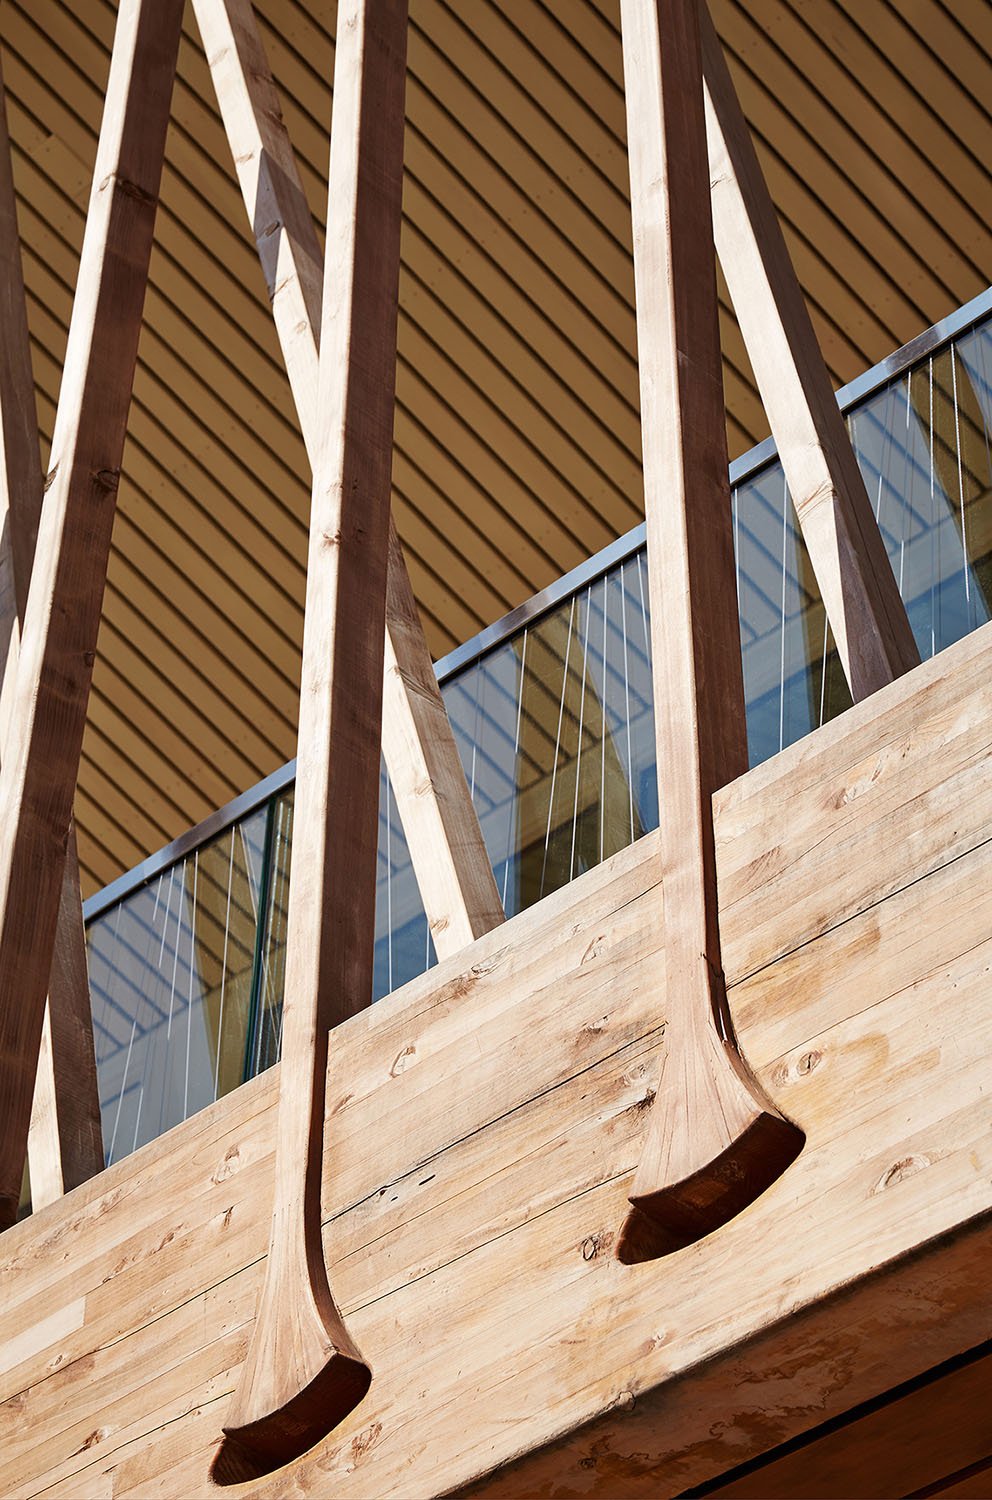 The wood battens are bundled at the glulam beams to minimize the load at mid-span and are offset to distribute the load evenly. The flared detail at the lower cord connects the battens and beams without an | 